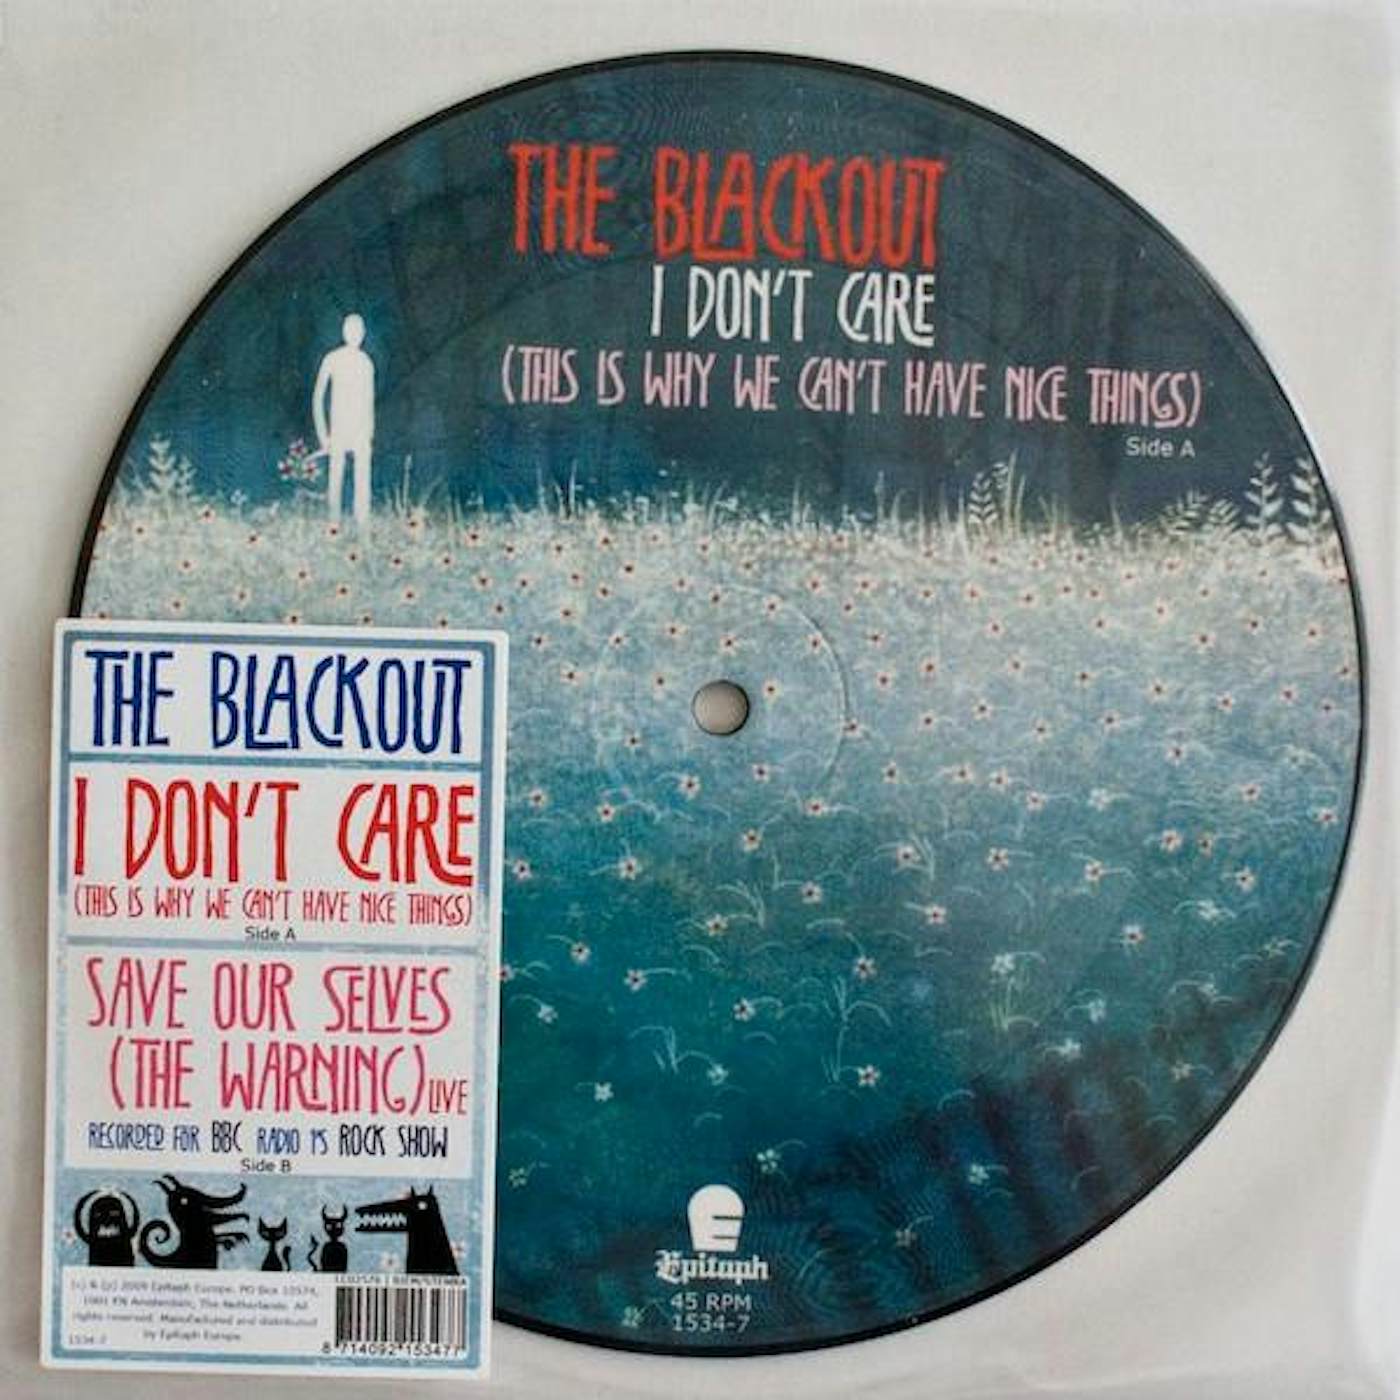 Blackout I DON'T CARE (THIS IS WHY WE CAN'T HAVE NICE THING Vinyl Record